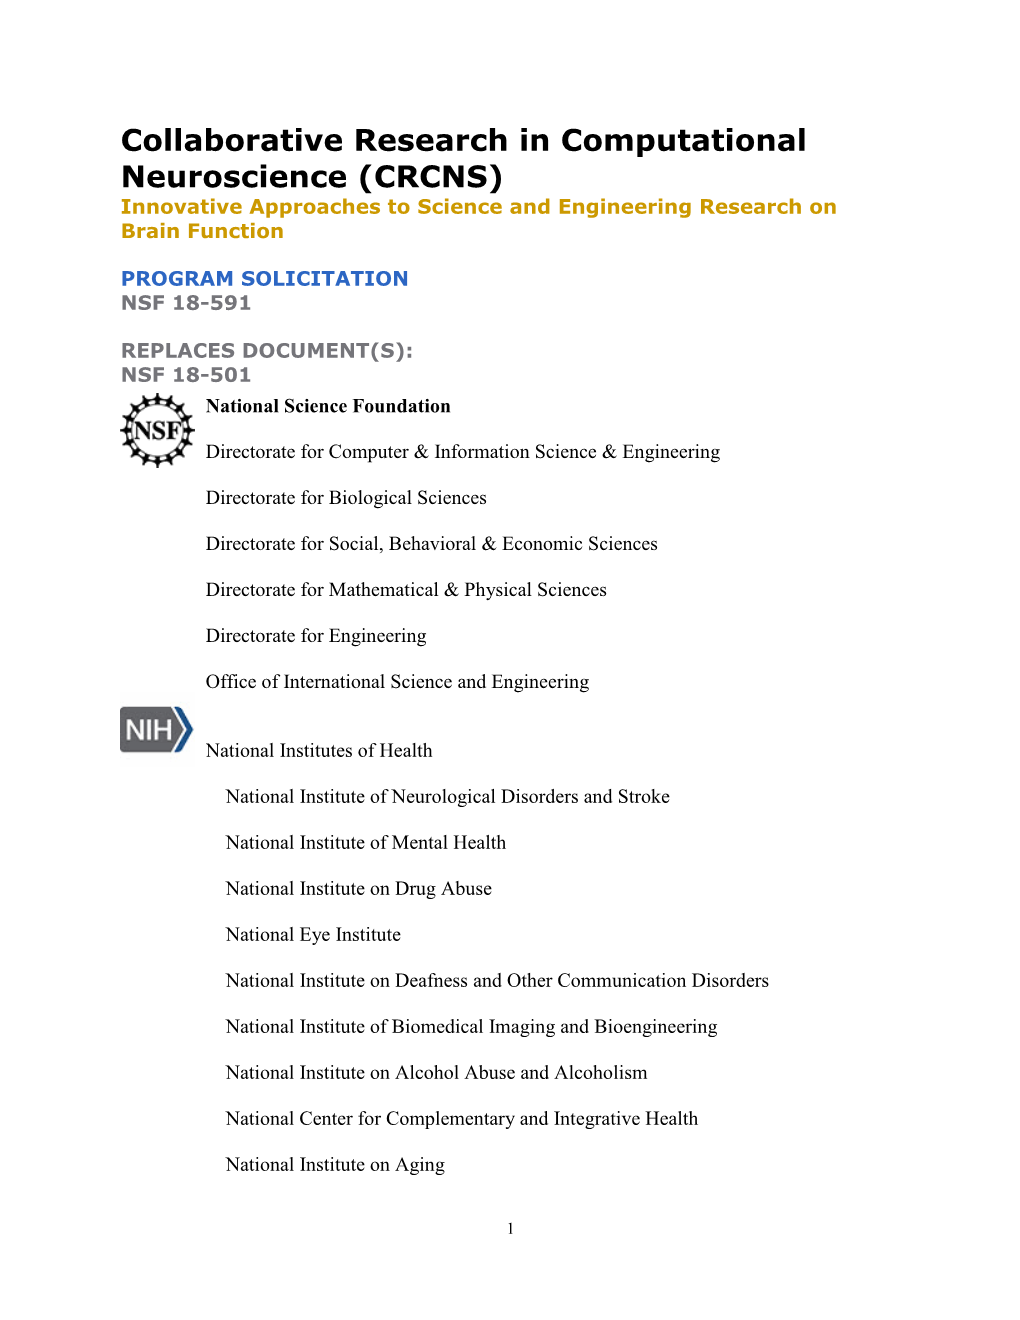 Collaborative Research in Computational Neuroscience (CRCNS) Innovative Approaches to Science and Engineering Research on Brain Function